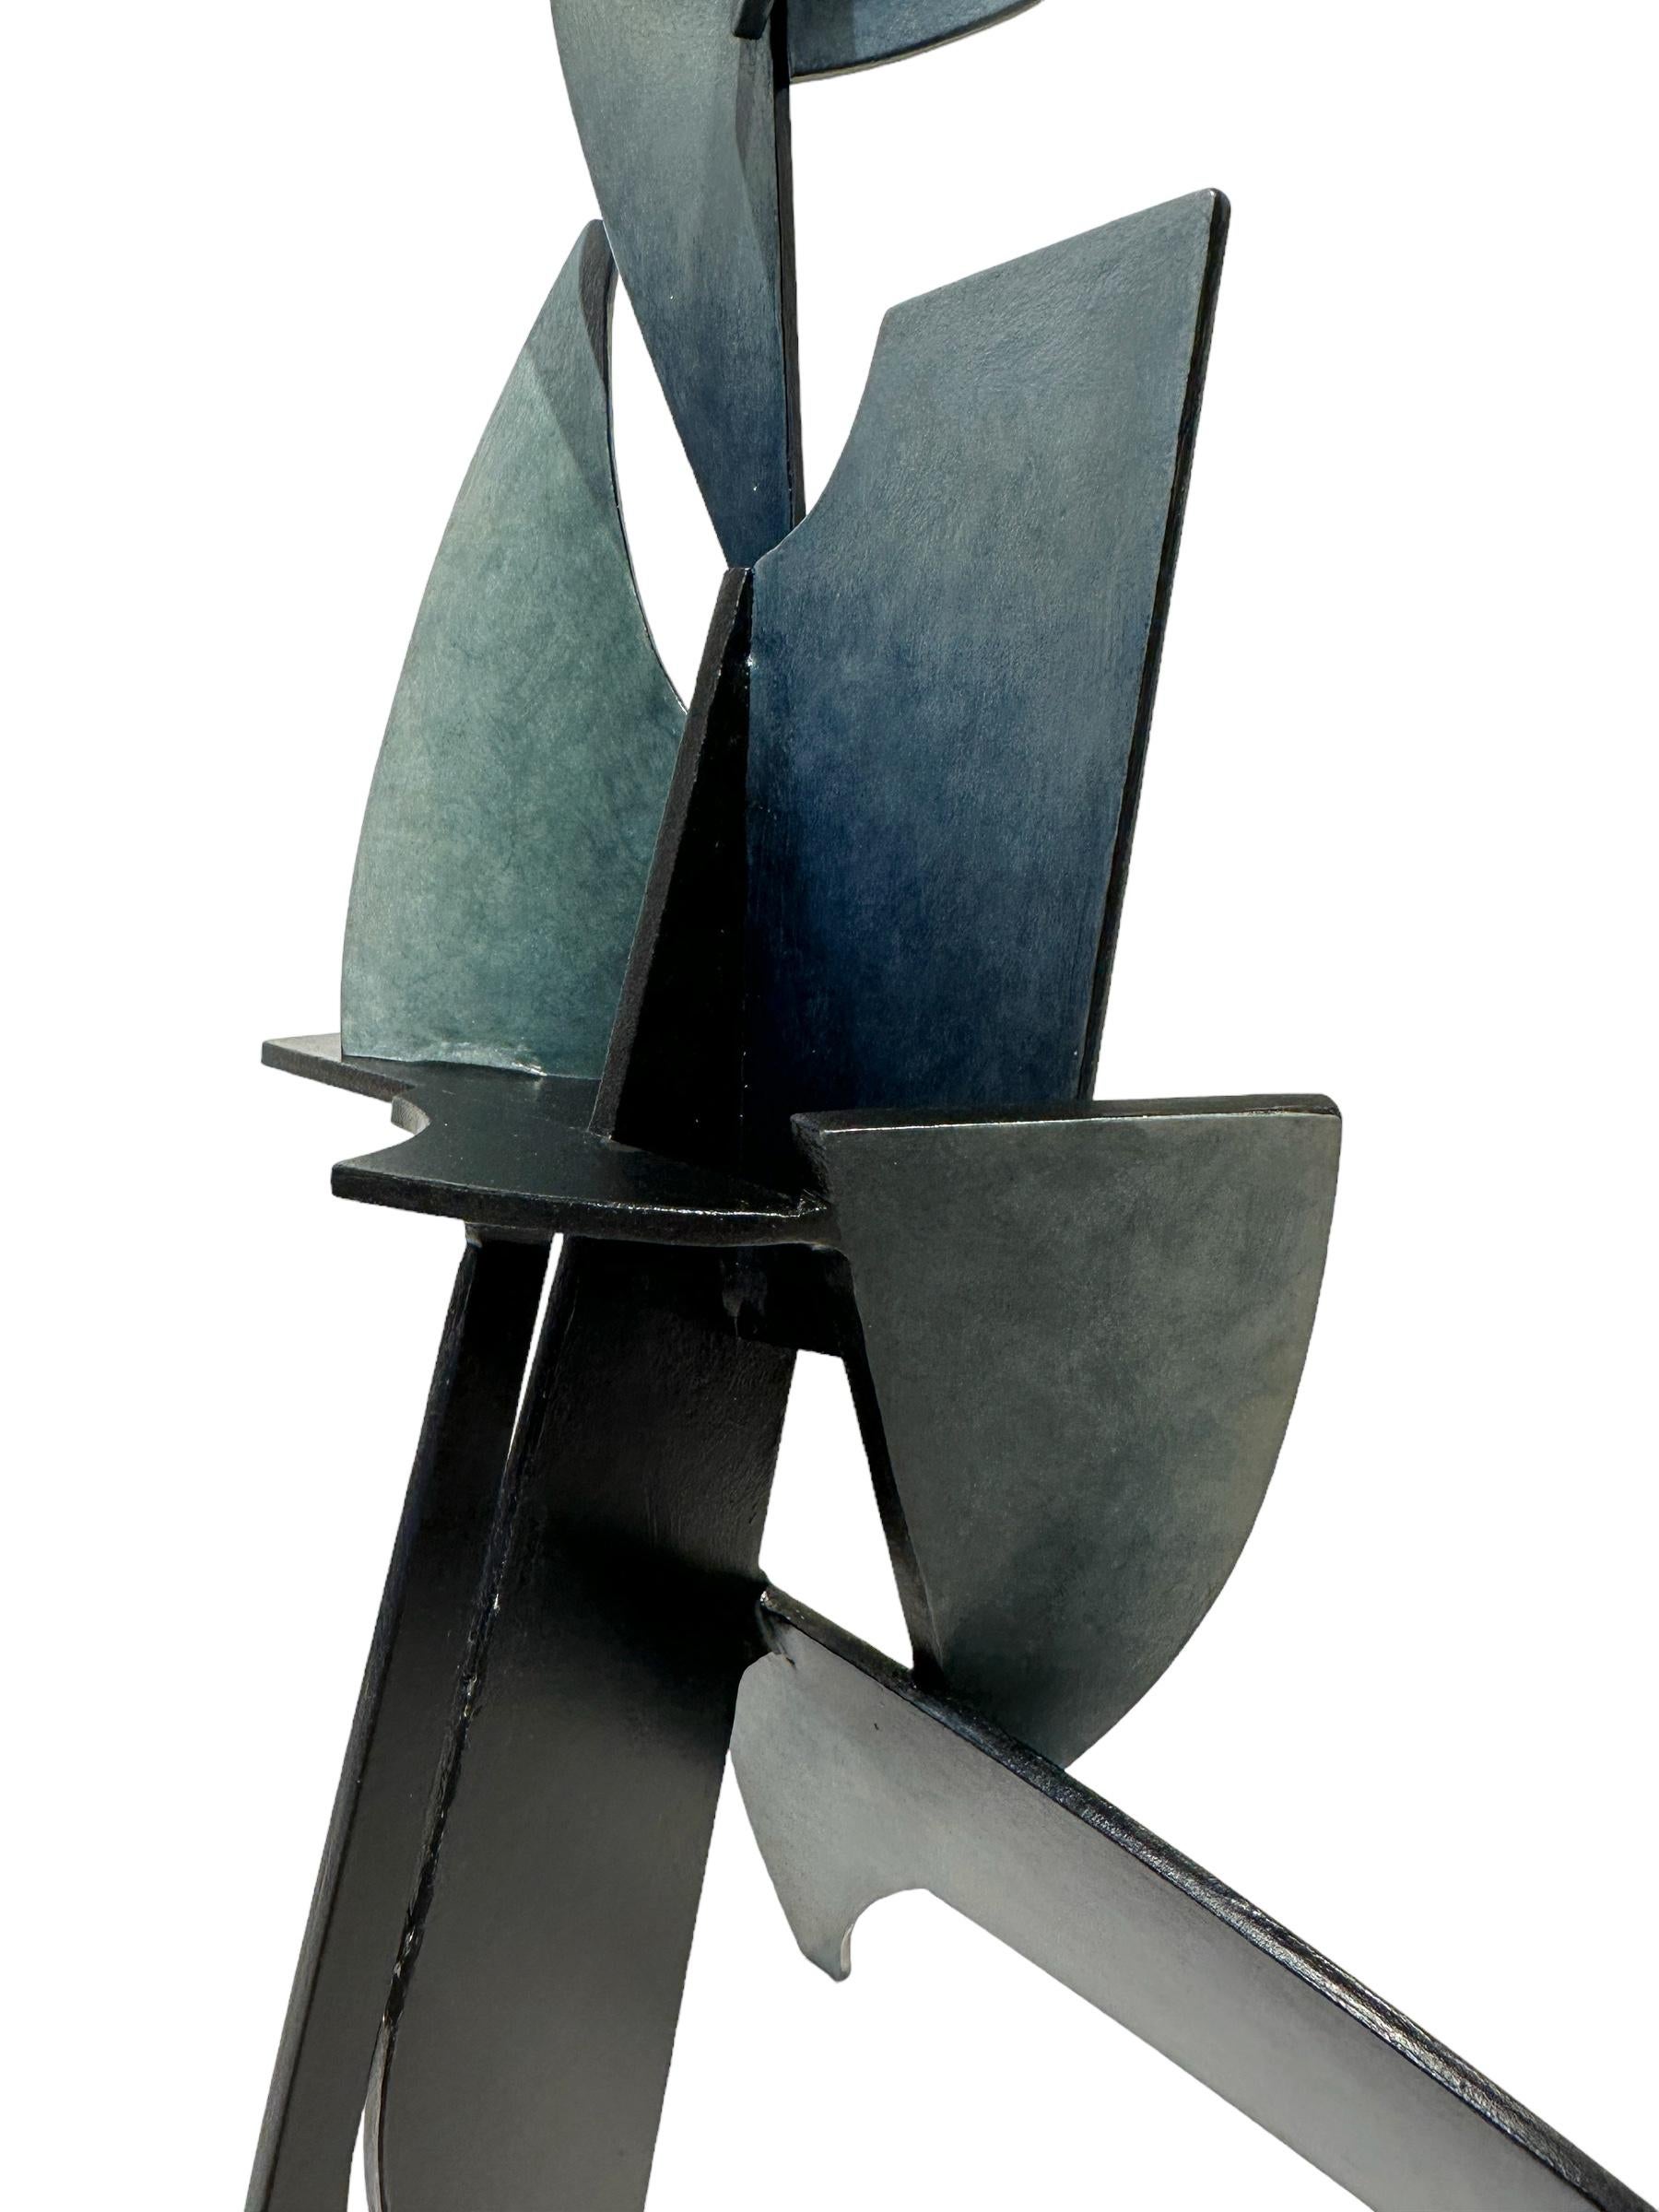 Spirit - Abstract Geometric Form, Hand Painted, Welded Steel Sculpture  For Sale 8